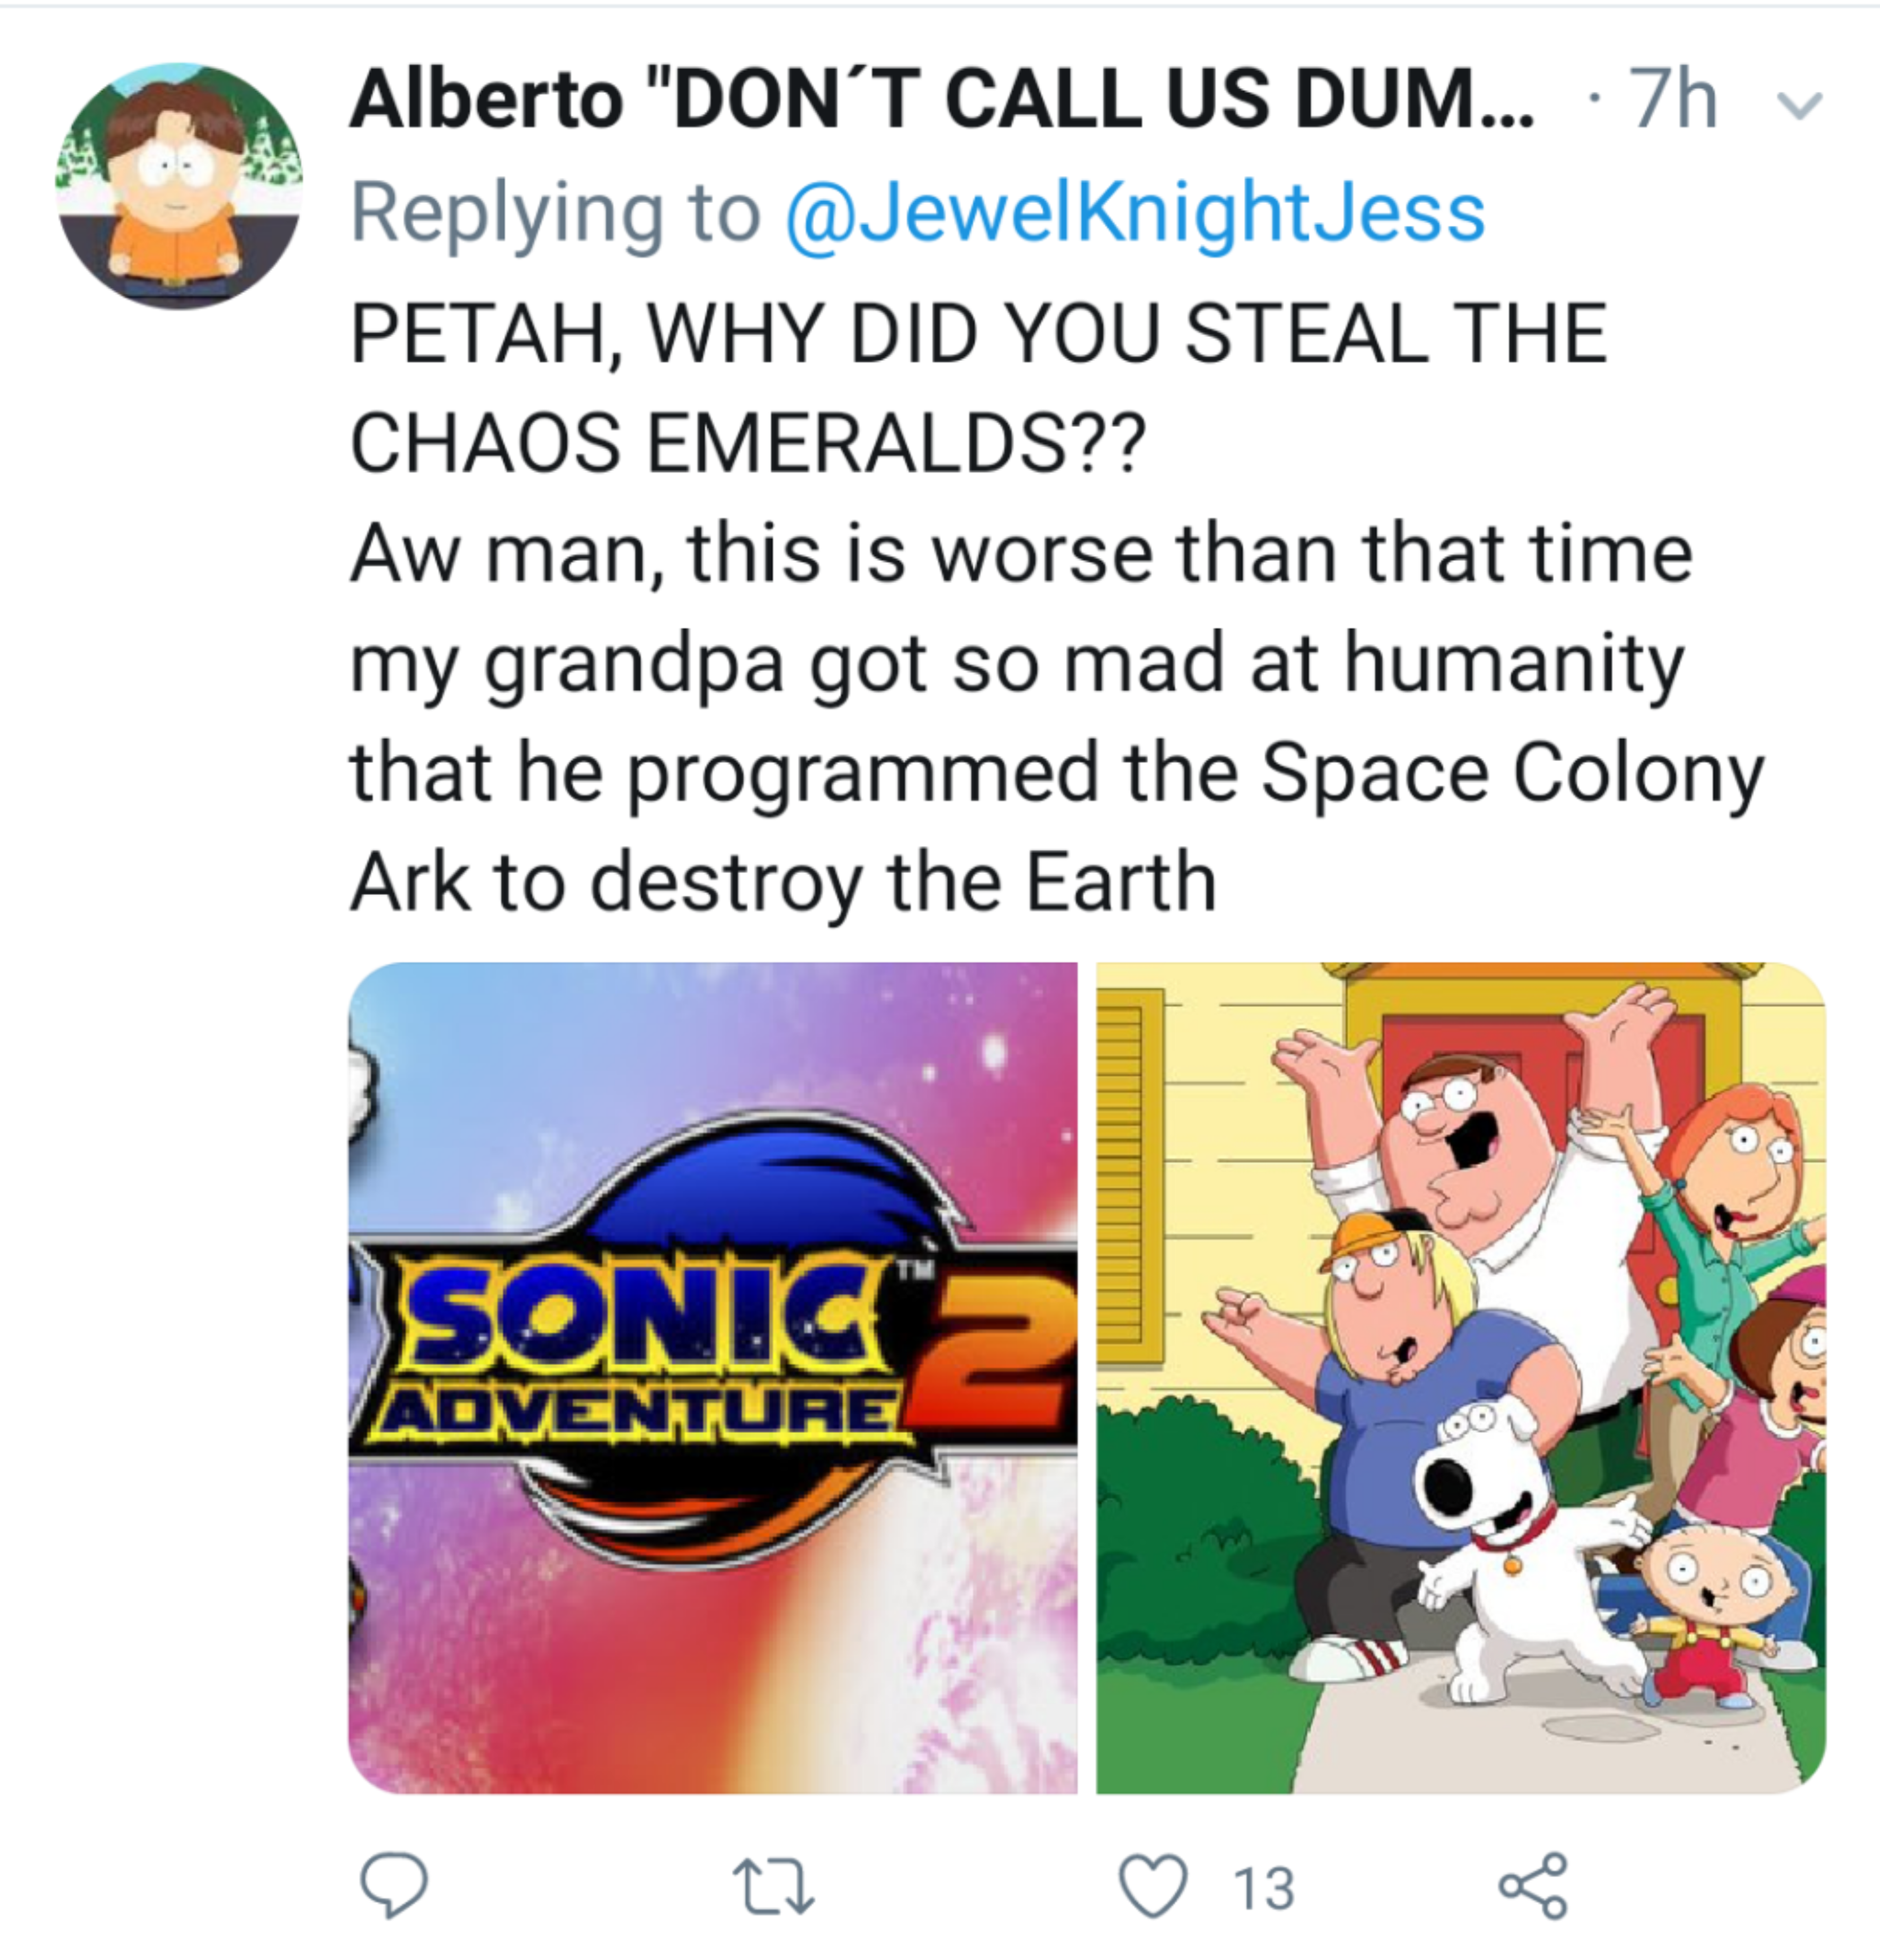 cartoon - Alberto "Don'T Call Us Dum... .7h Petah, Why Did You Steal The Chaos Emeralds?? Aw man, this is worse than that time my grandpa got so mad at humanity that he programmed the Space Colony Ark to destroy the Earth Sonic Adventure 9 ta O 13